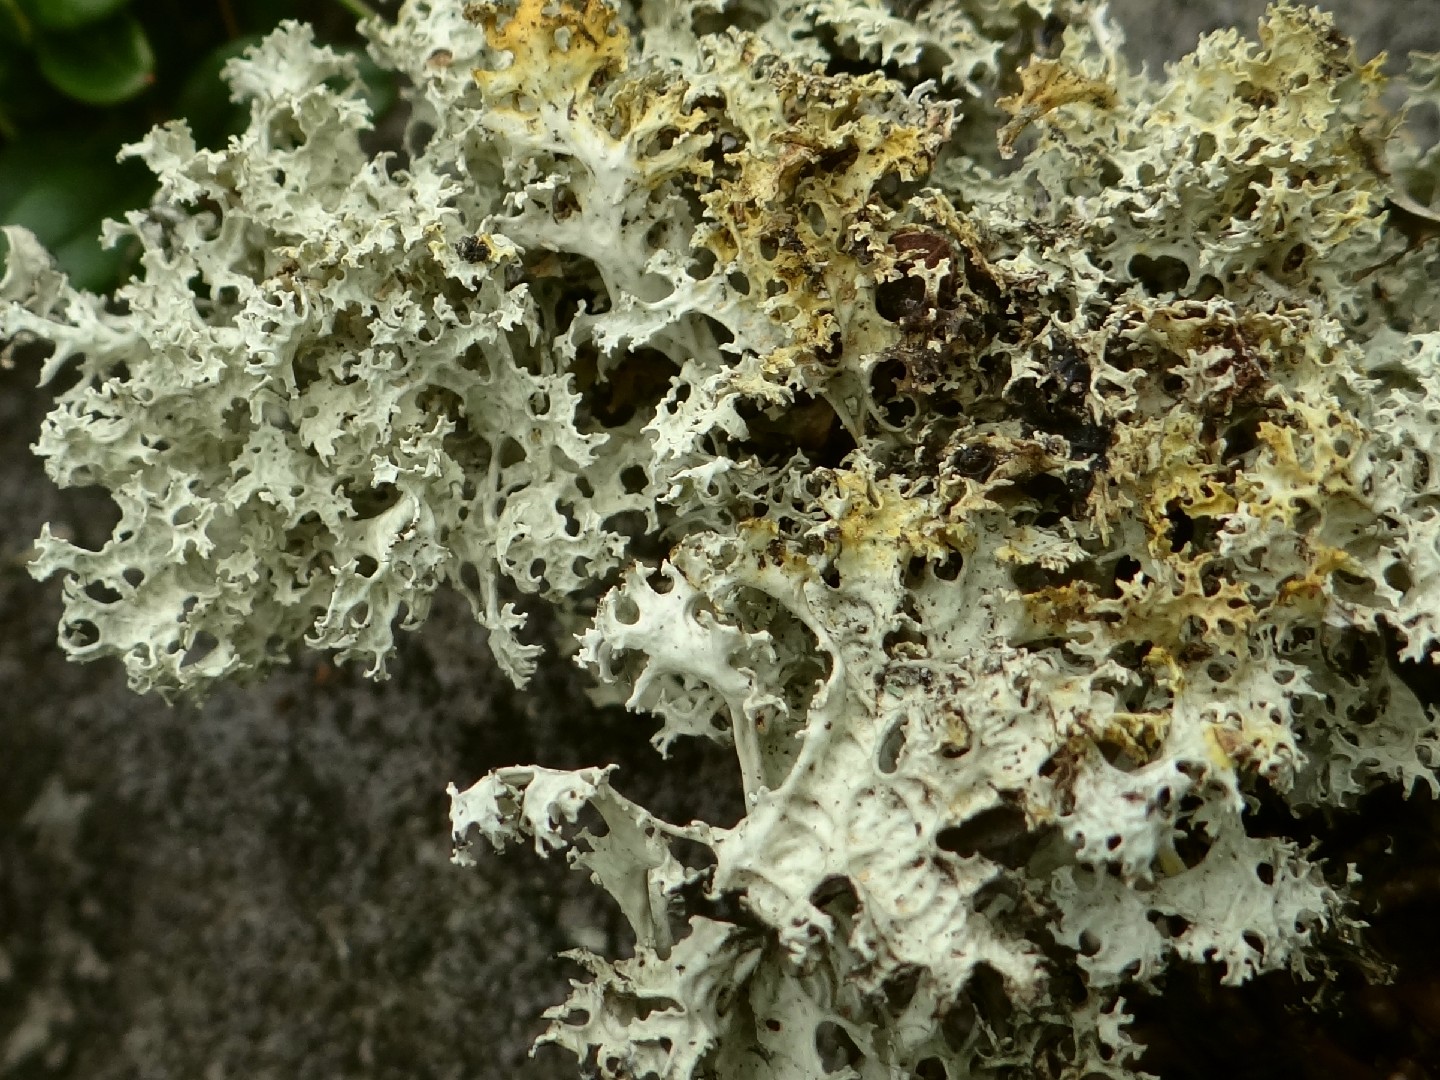 Crinkled snow lichen (Flavocetraria nivalis)